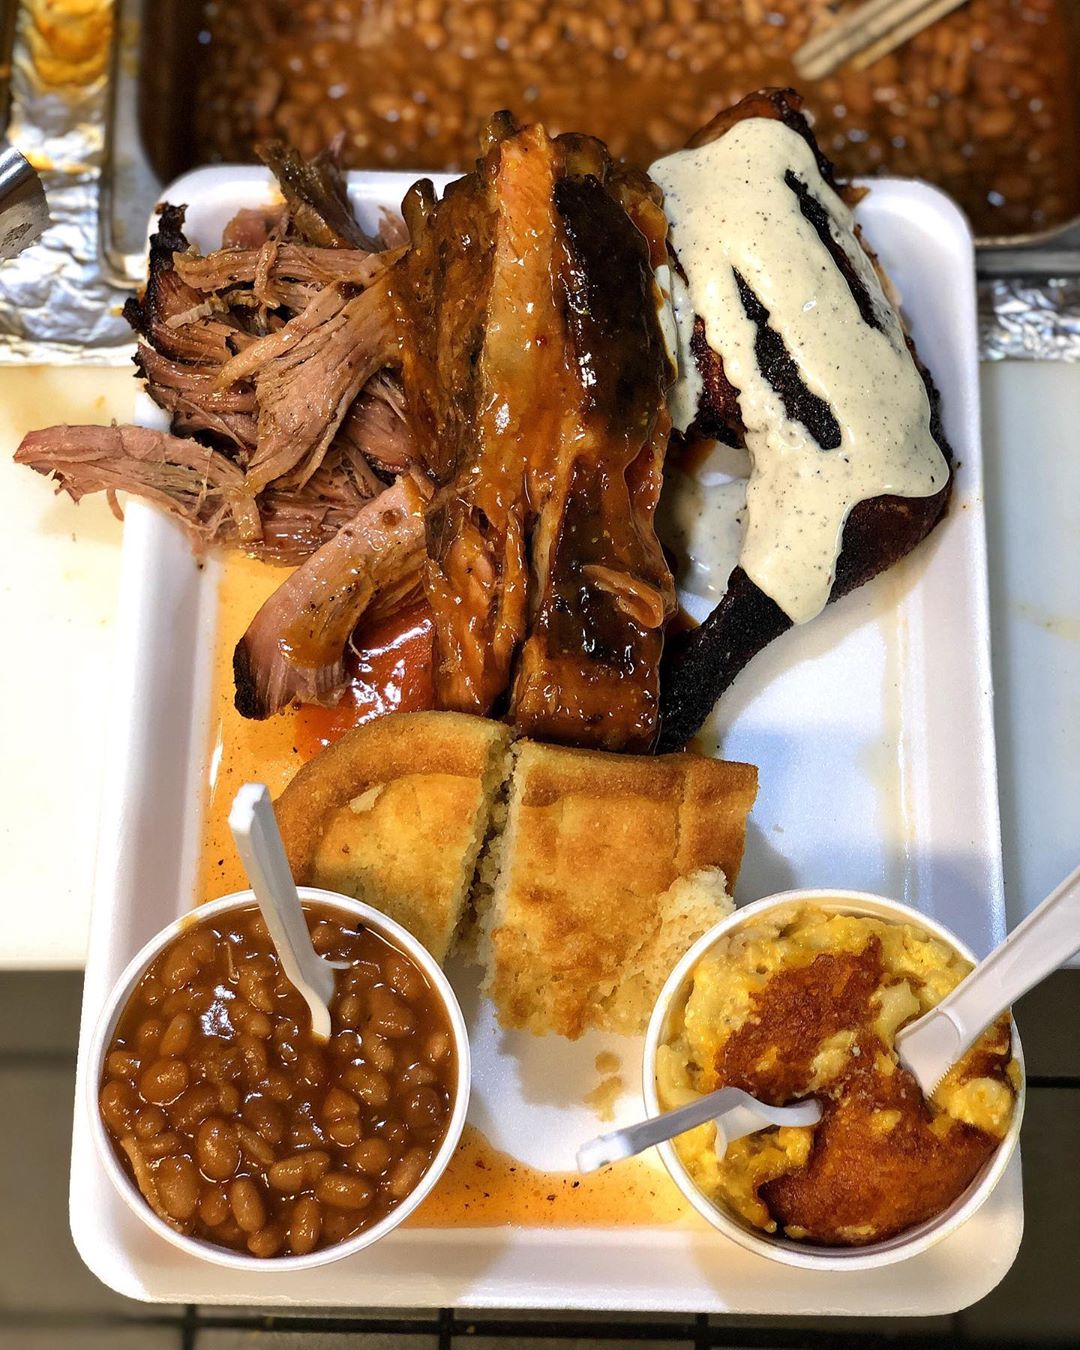 Plate of pulled pork and baked beans from Saws BBQ. Photo by Instagram user @saws_bbq